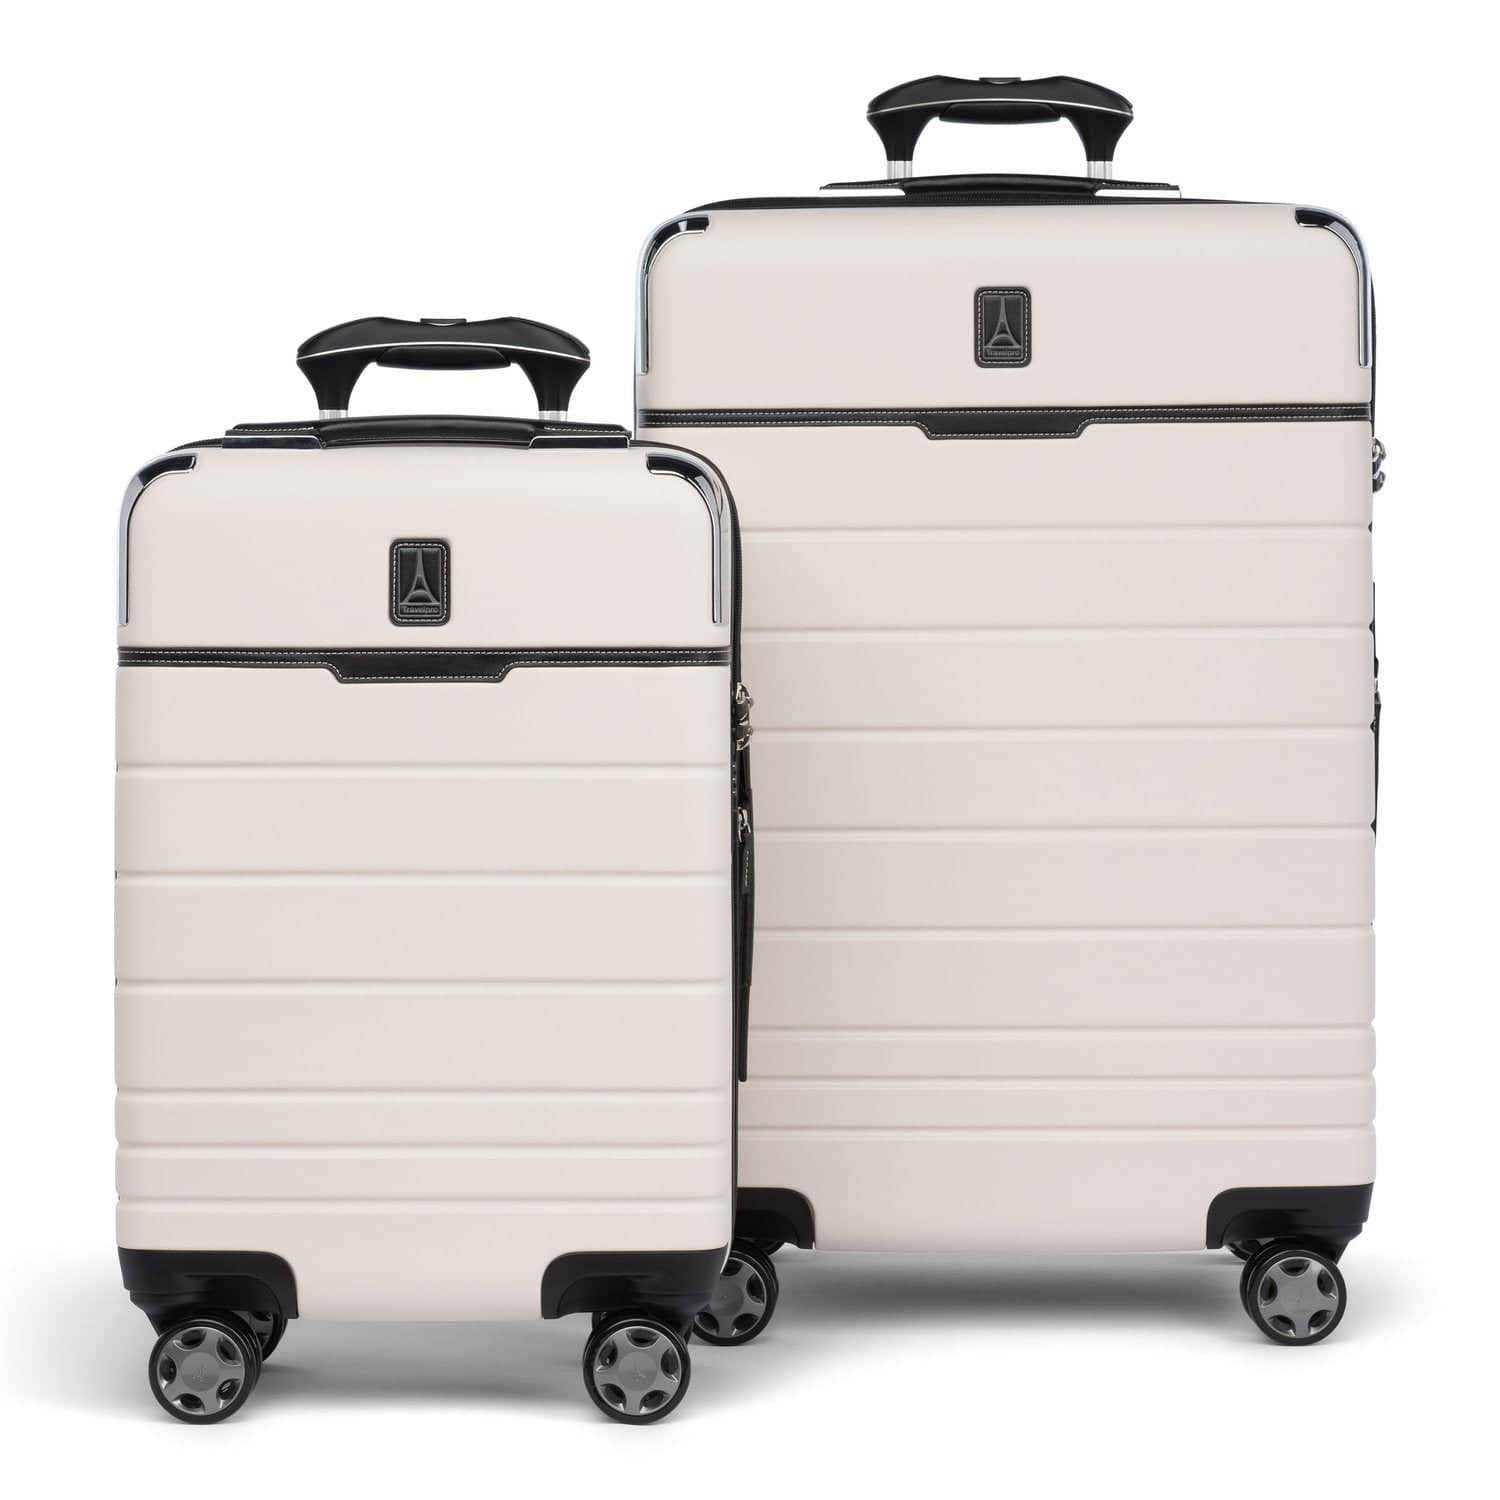 Travelpro® x Travel + Leisure® Compact Carry-on/Checked Medium Spinner - Luggage Set